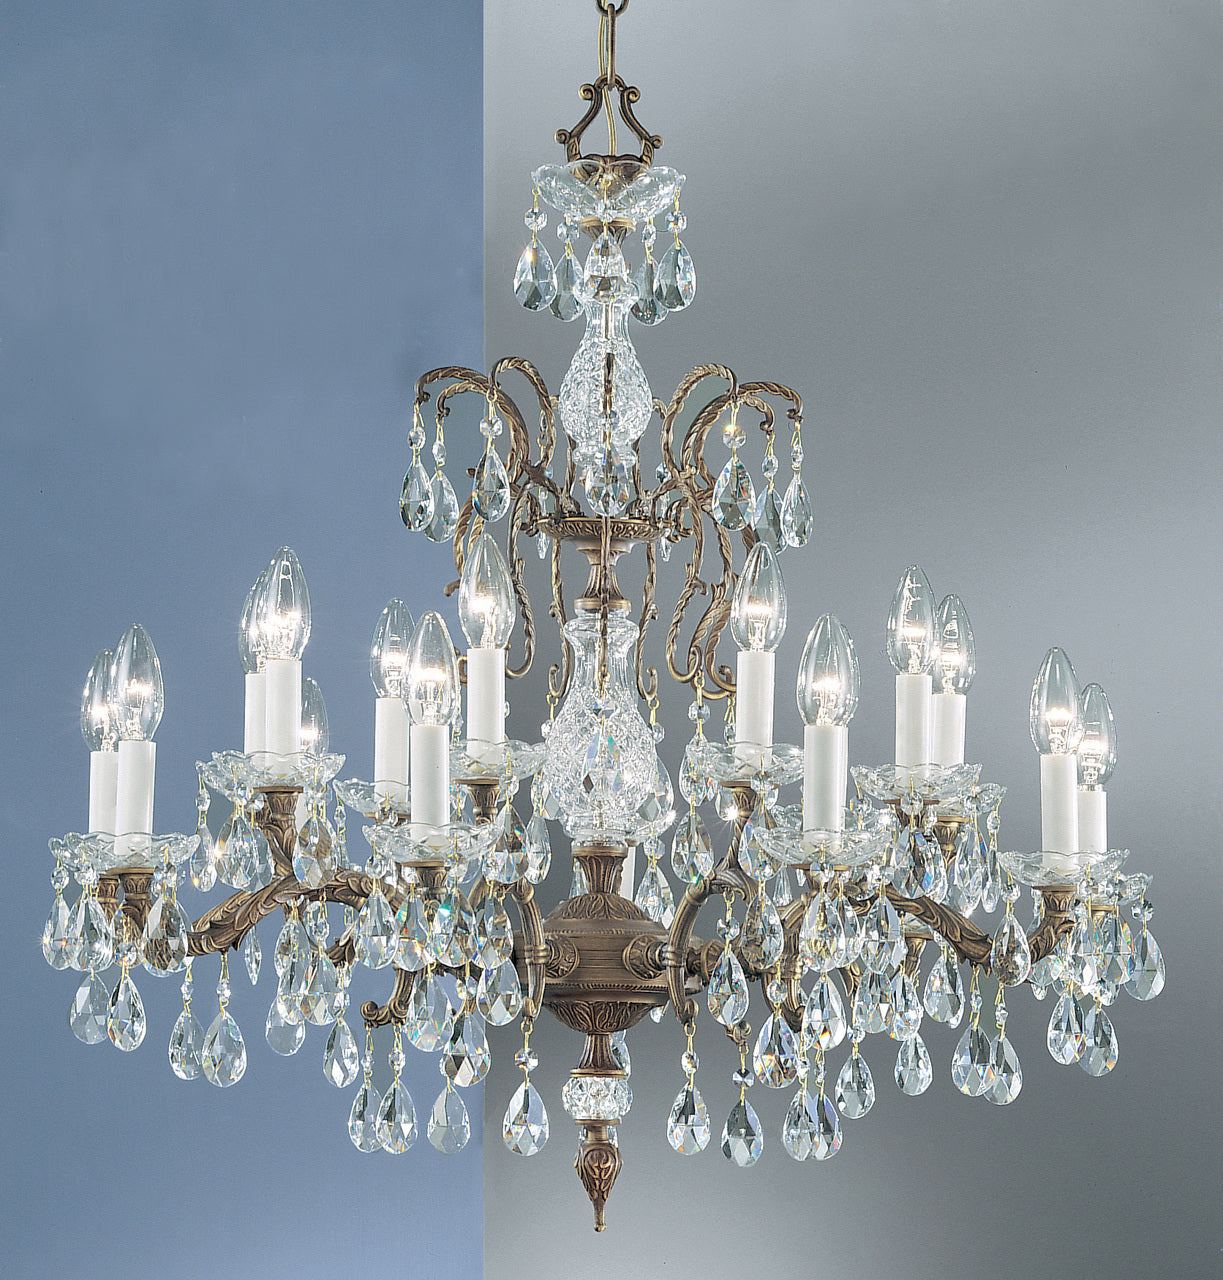 Classic Lighting 5538 RB C Madrid Crystal/Cast Brass Chandelier in Roman Bronze (Imported from Spain)